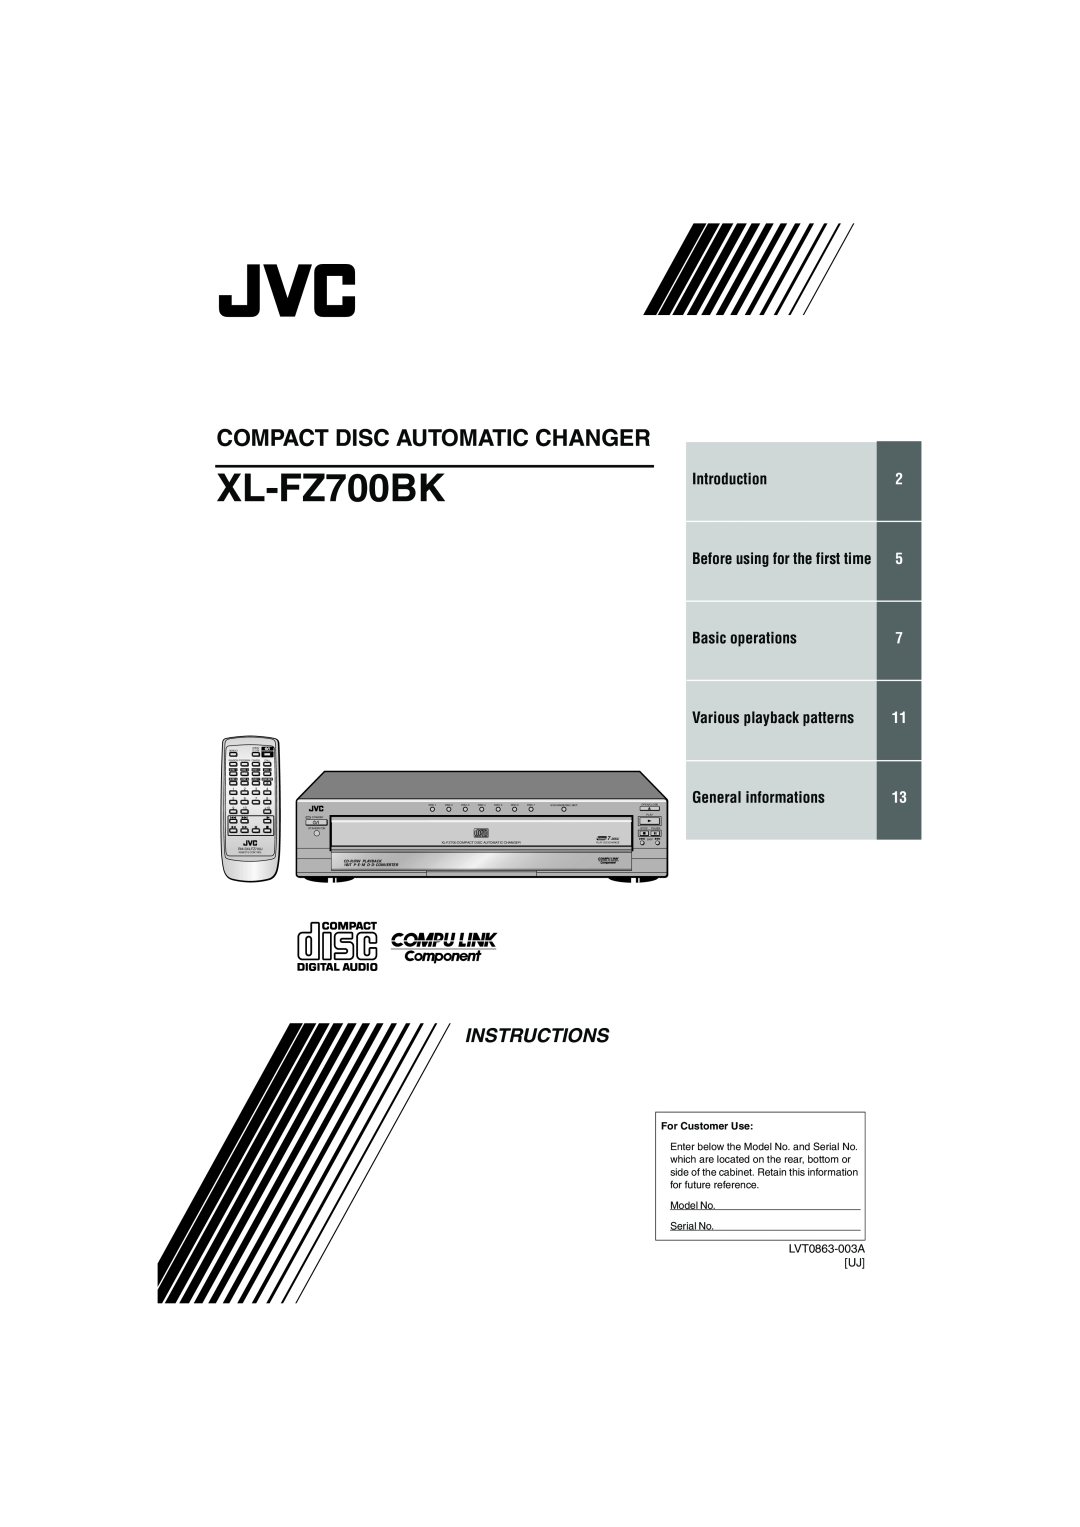 JVC XL-FZ700BK manual Compact Disc Automatic Changer, Instructions, Introduction, Basic operations, General informations 